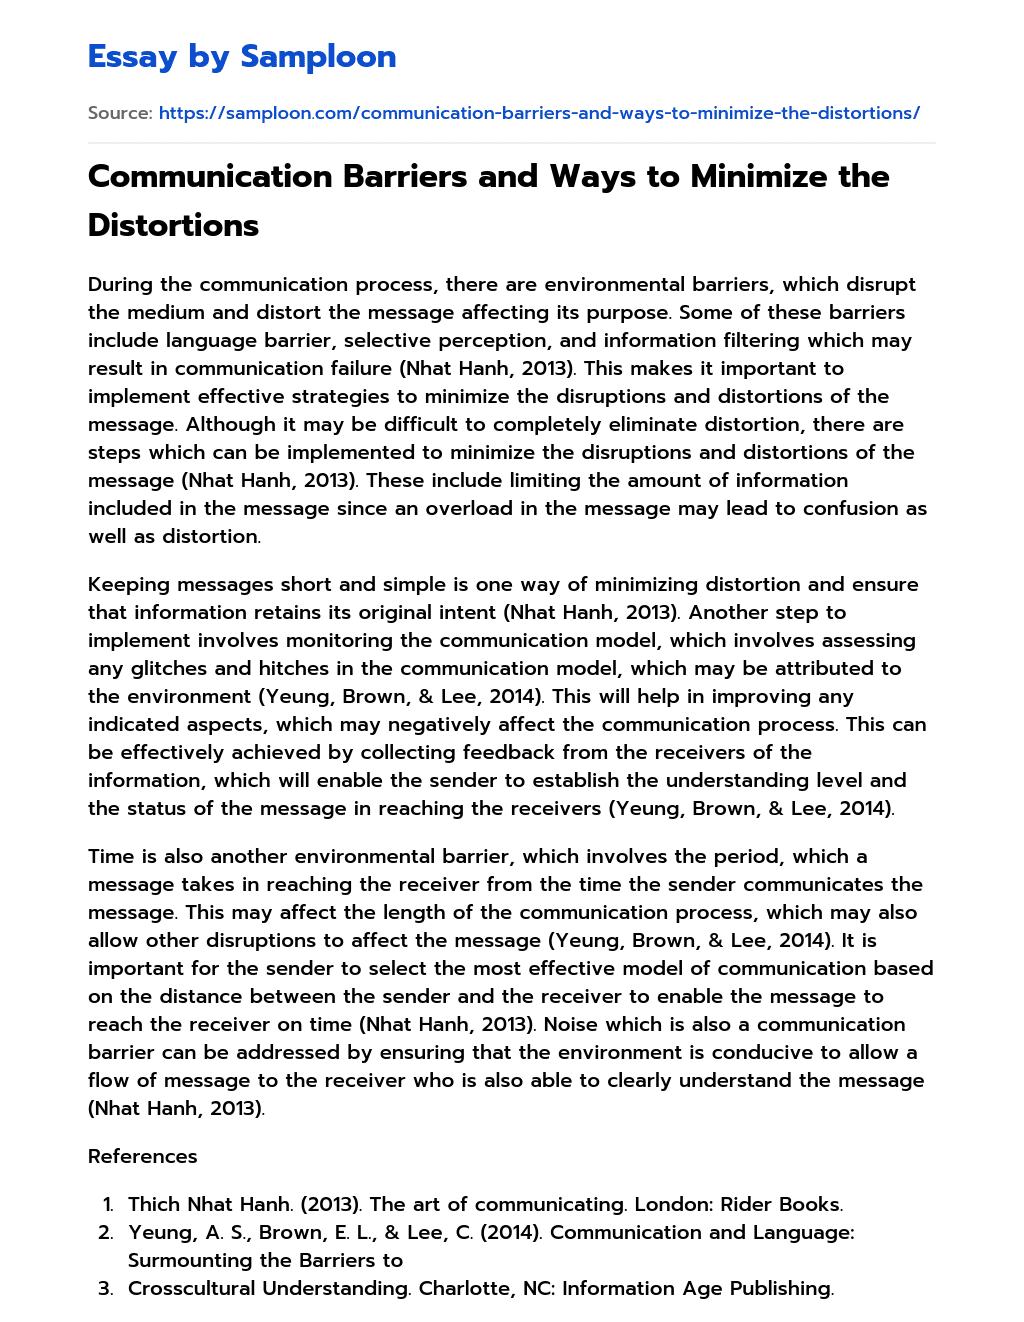 Communication Barriers and Ways to Minimize the Distortions essay